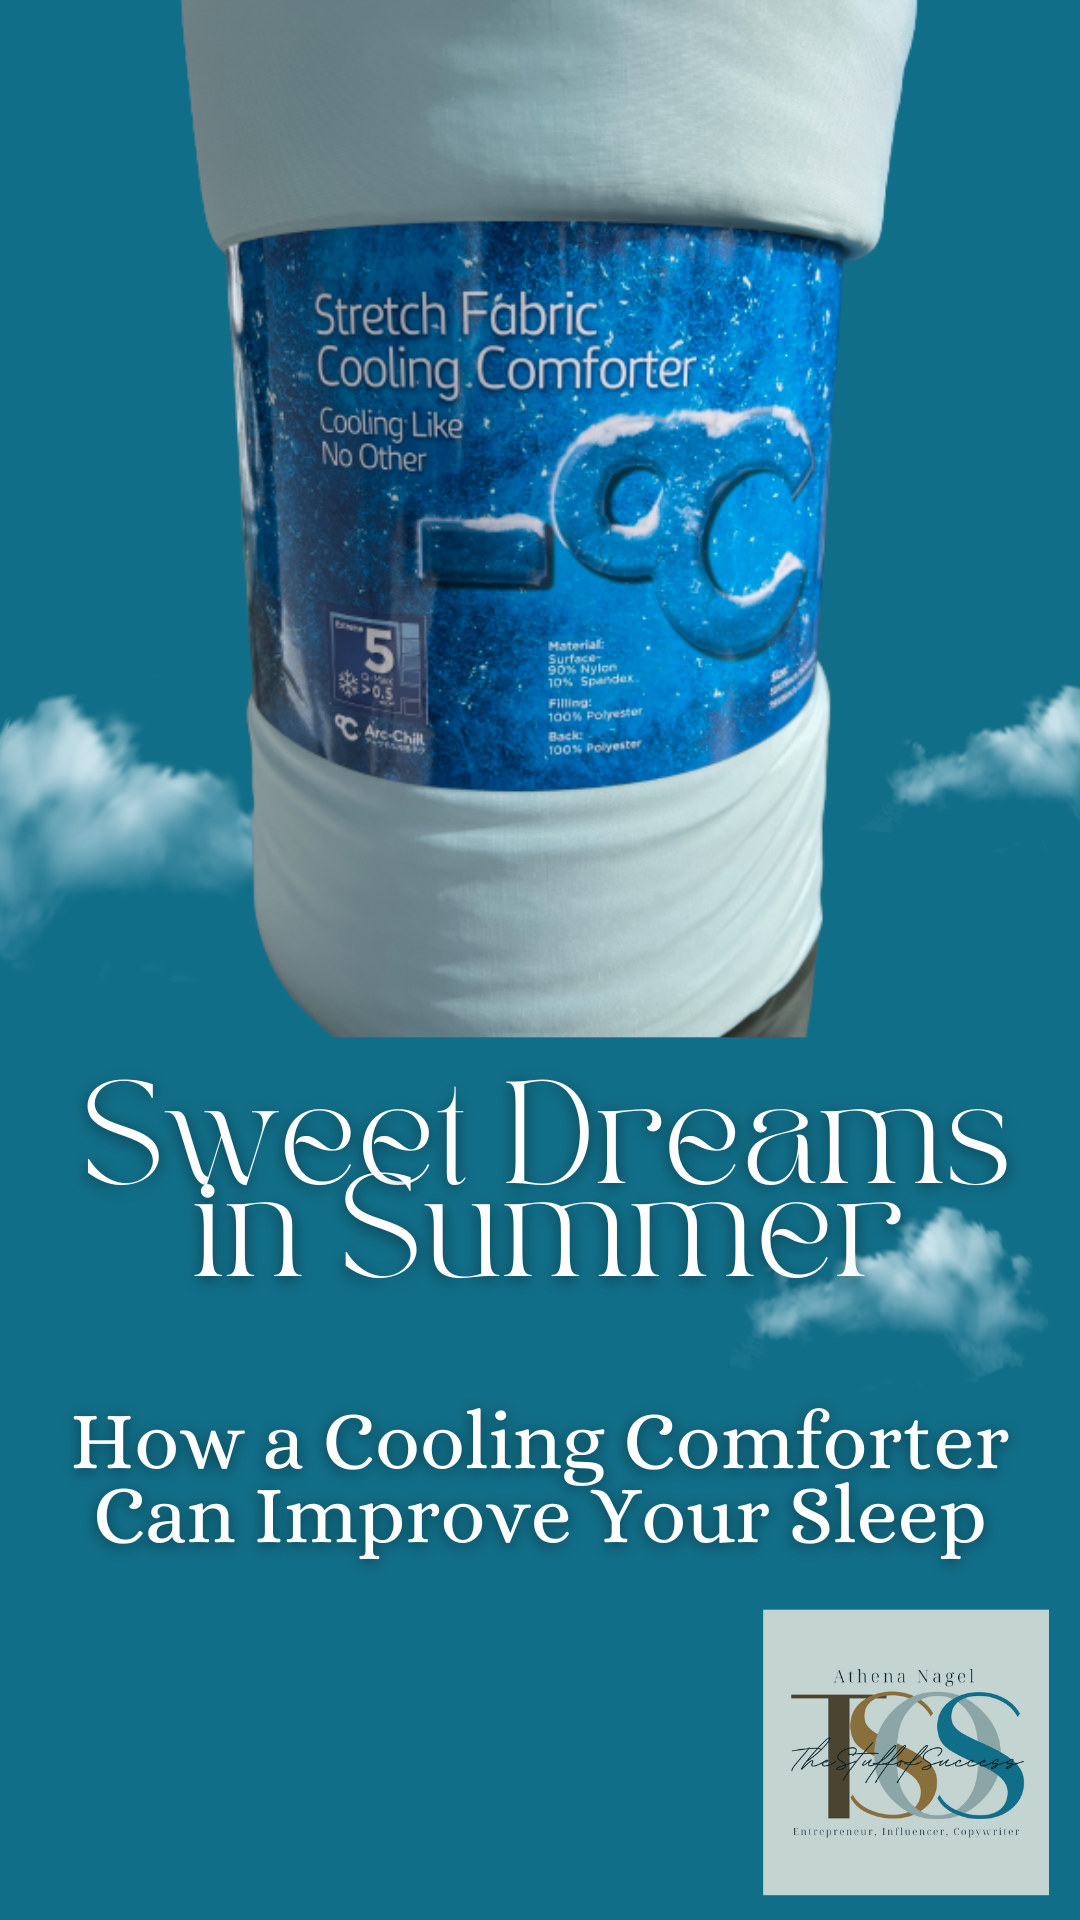 How a Cooling Comforter Can Improve Your Sleep